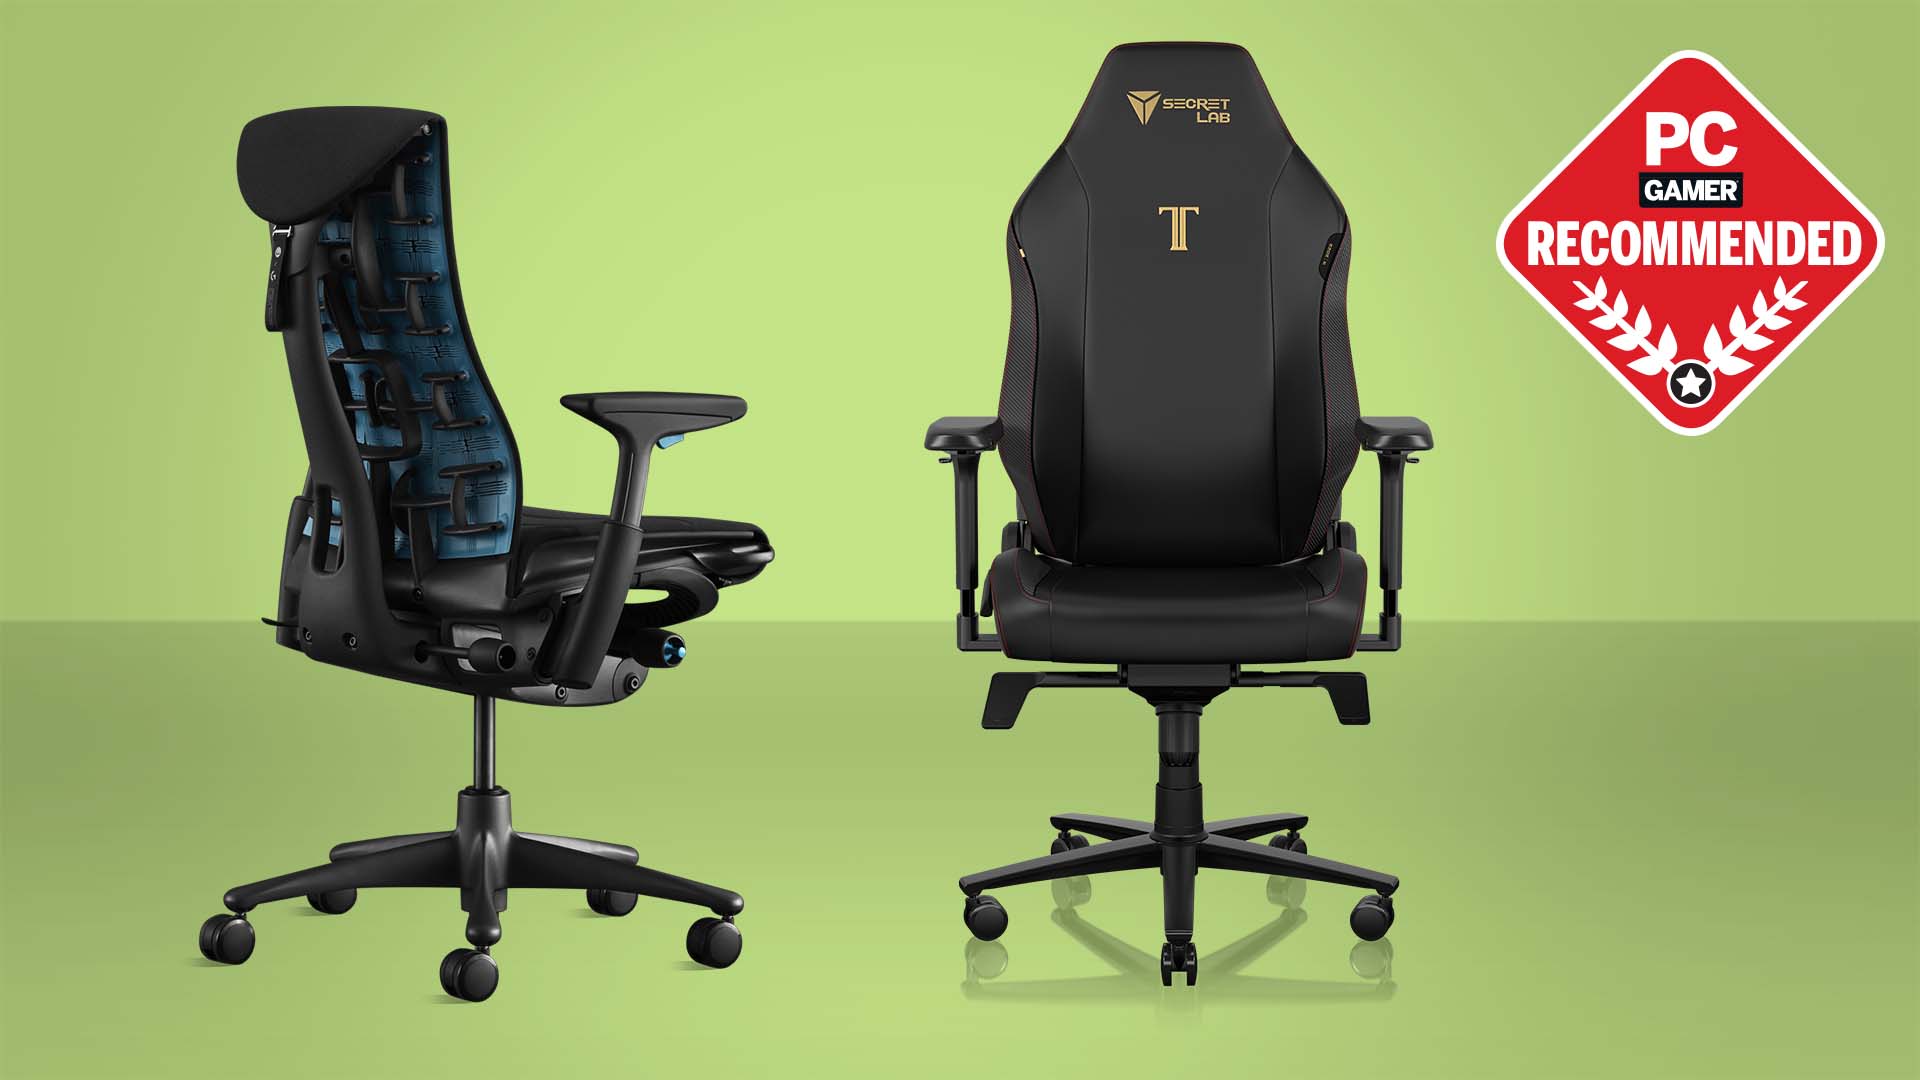 Recomended Best budget gaming chair uk with Sporty Design